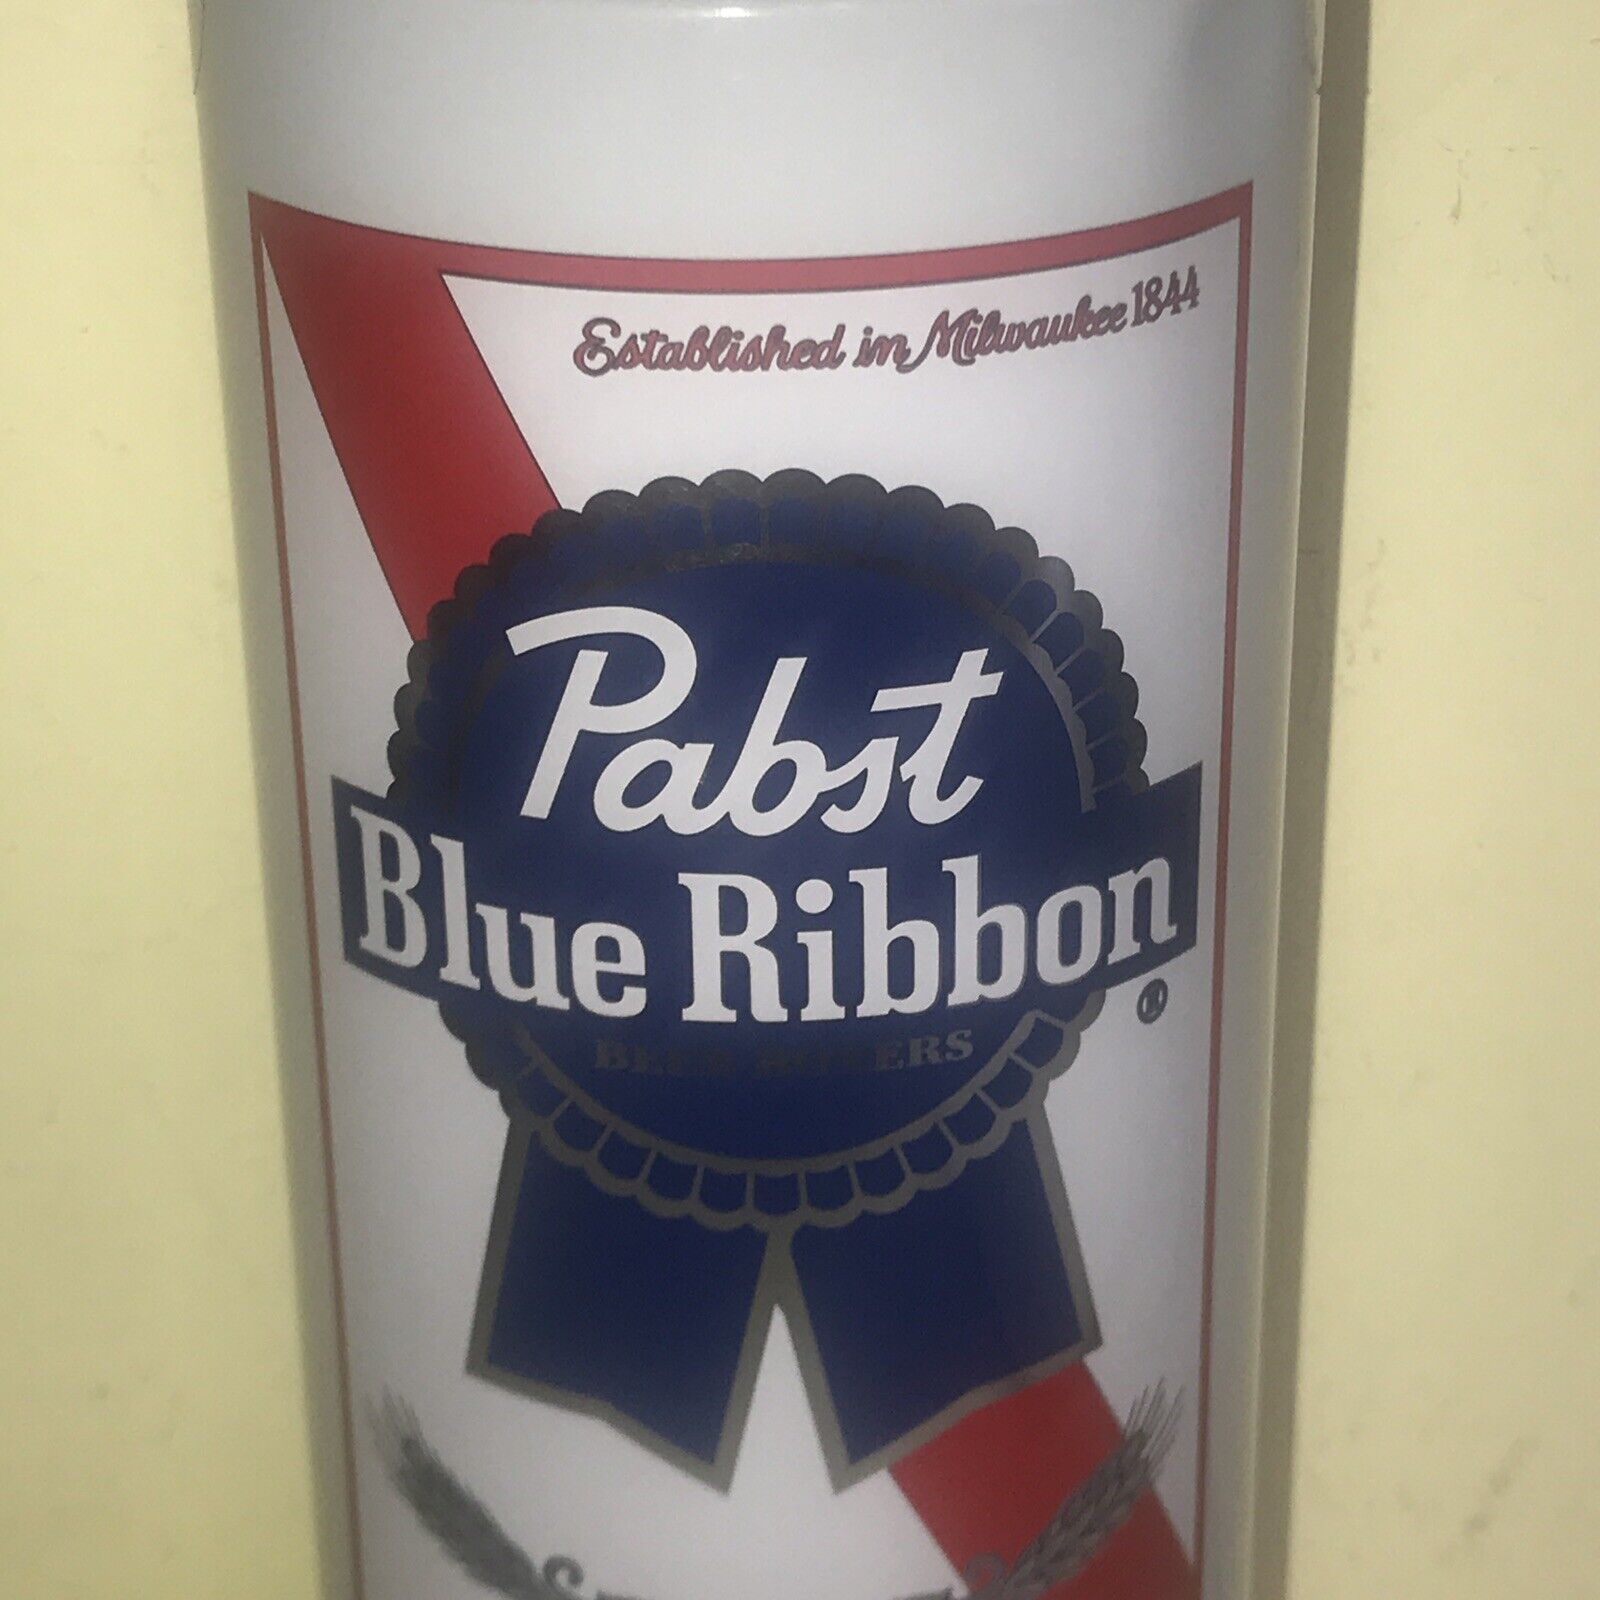 PBR Pabst Blue Ribbon Beer Lounge Pants in a can-SIZE SMALL S Swag Boxers Pabst Blue Ribbon - фотография #5